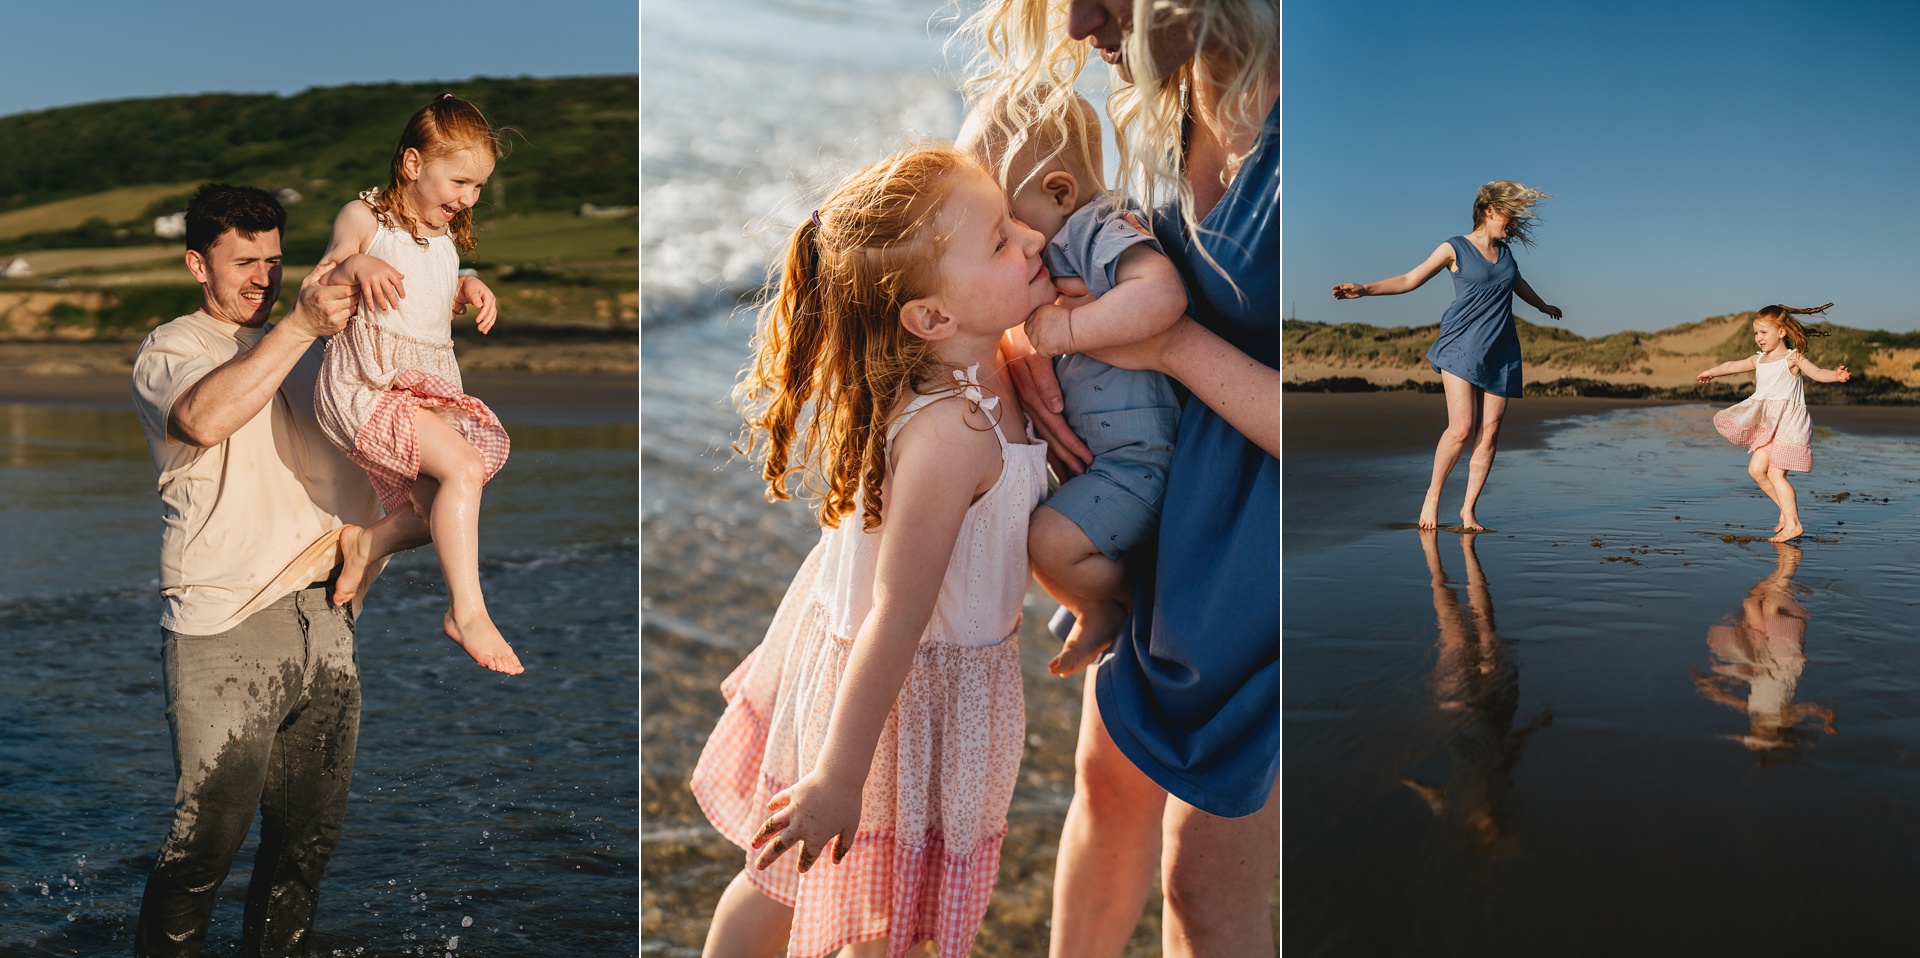 Selection of images from a session of family photography in North Devon